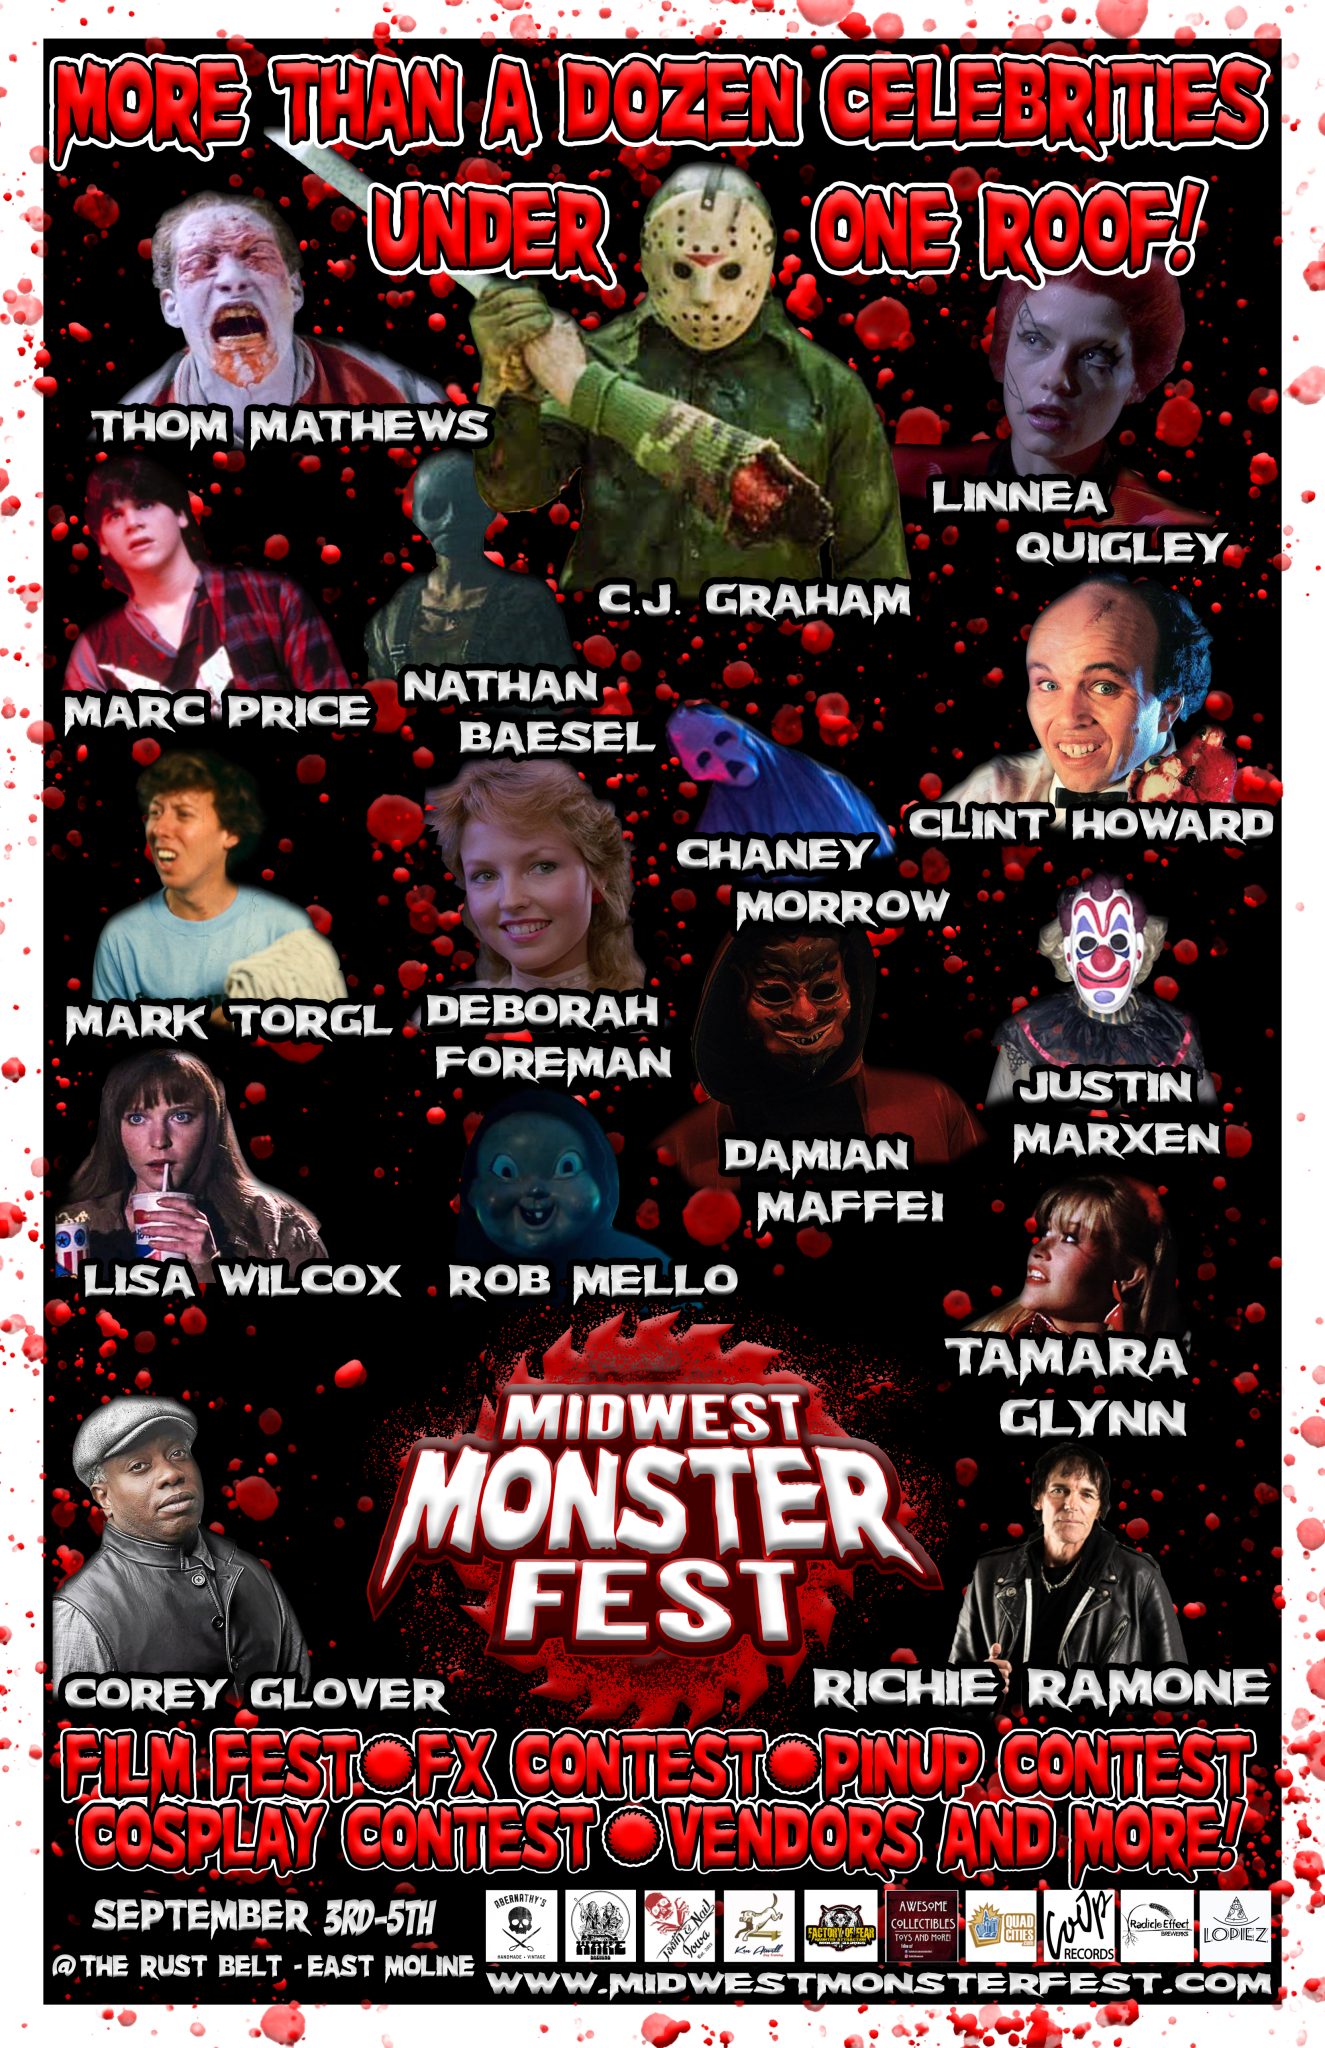 Midwest Monster Fest Stalks Into The Rust Belt This Weekend Quad